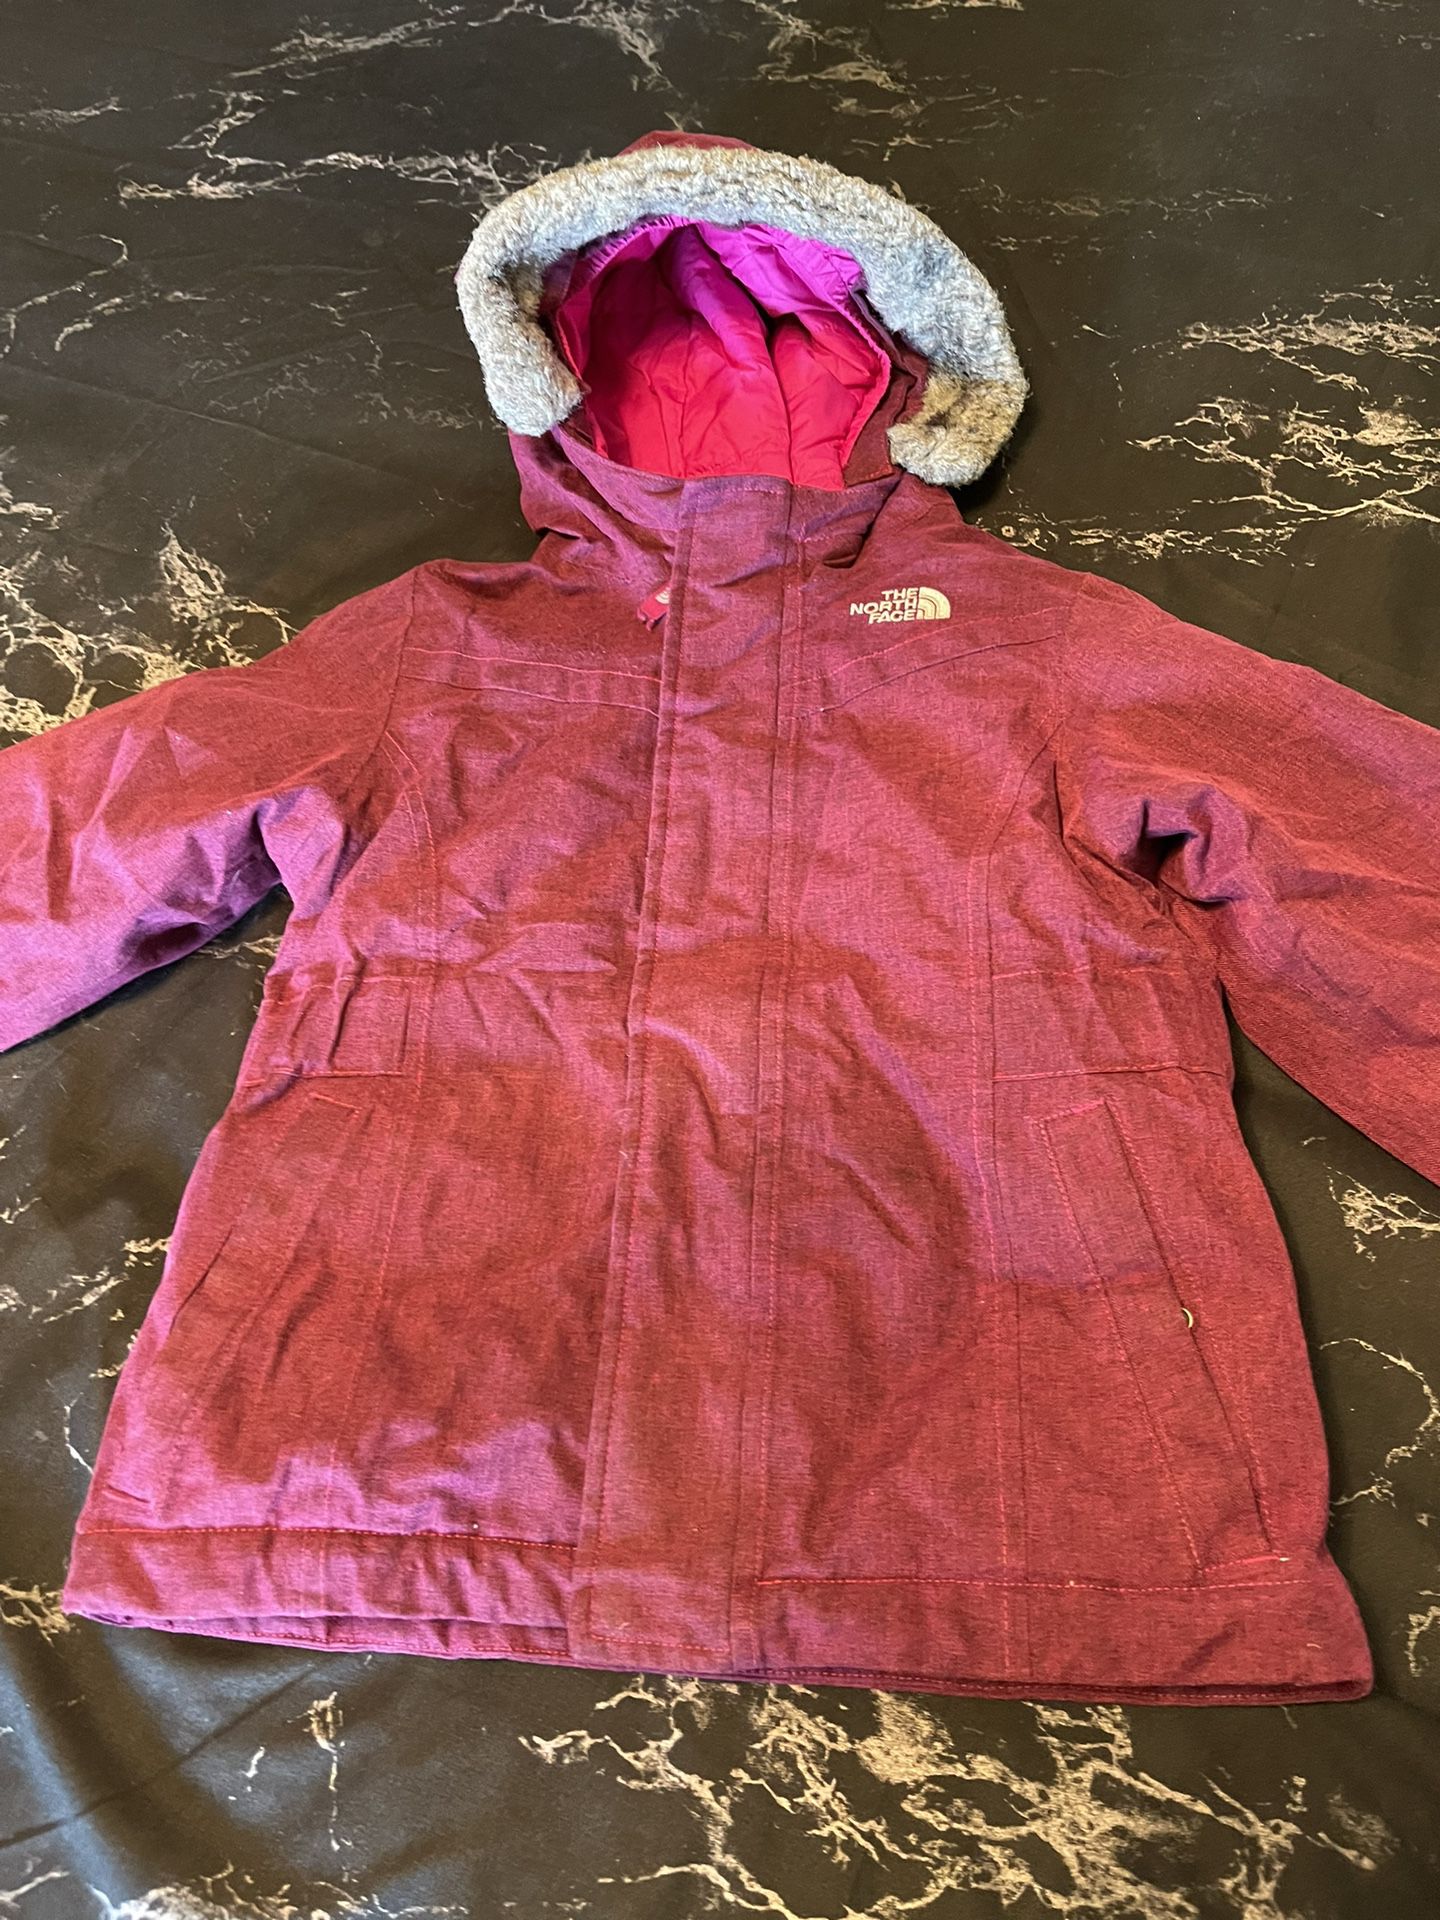 The North Face toddler's winter jacket size 5/5 with zipper in great condition.